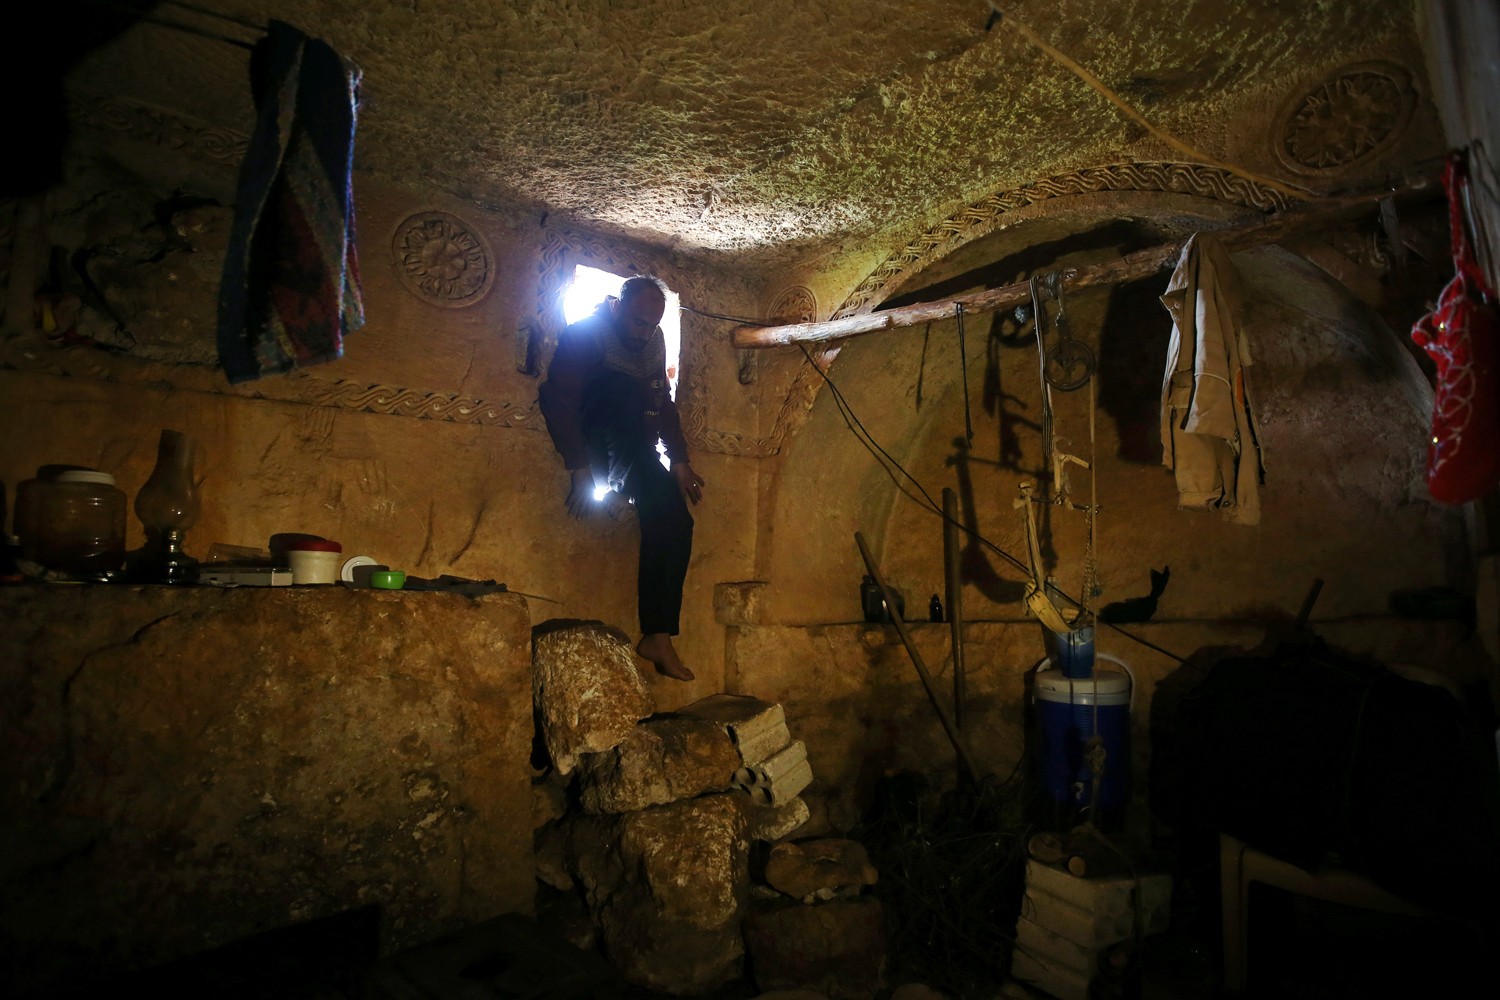 Feb. 28, 2013. Sami, 32, steps into an underground Roman tomb used for shelter from Syrian government forces shelling and airstrikes, at Jabal al-Zaweya, in Idlib province, Syria.